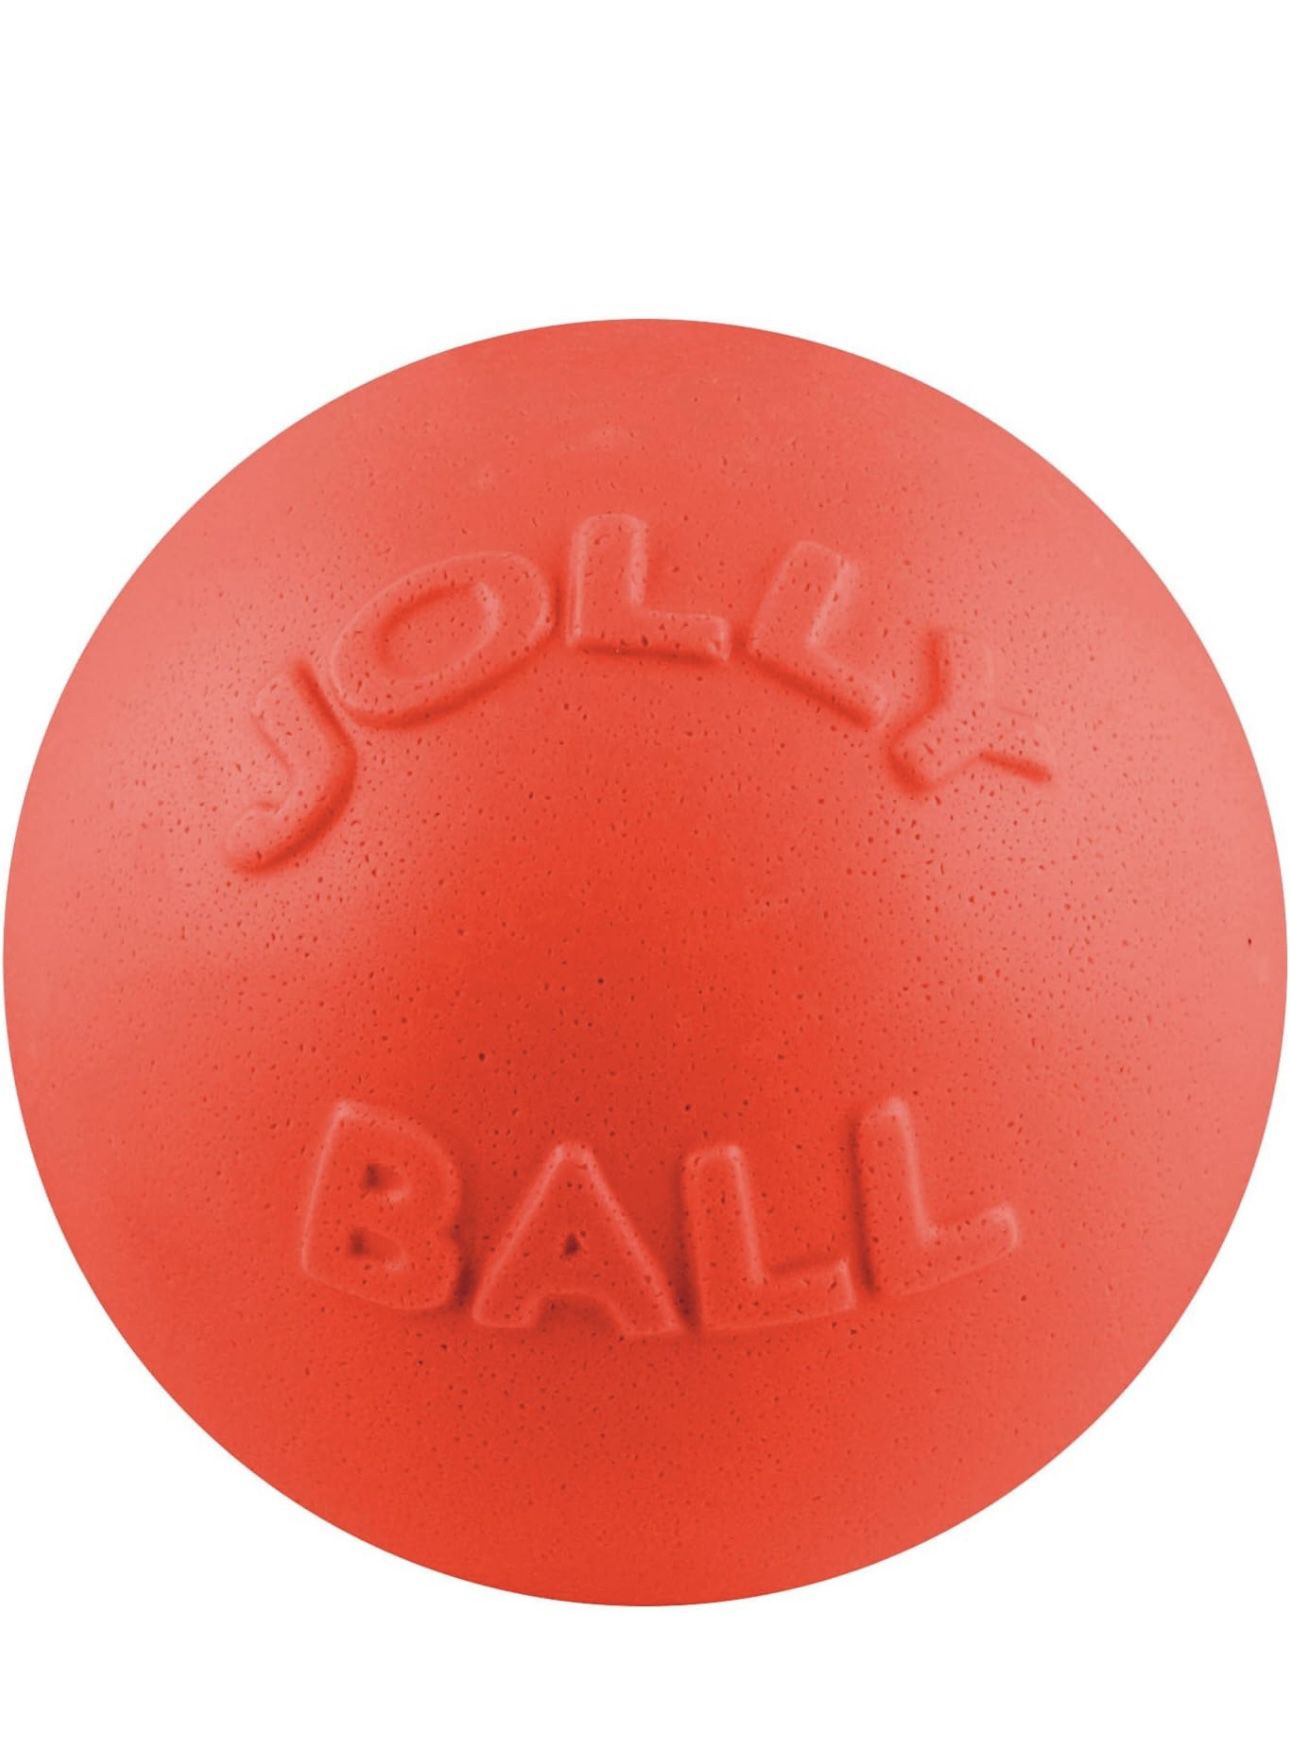 Jolly Pets Bounce-n-Play Dog Toy Ball, 8 Inches/Large, Orange, (Model: 2508 OR)